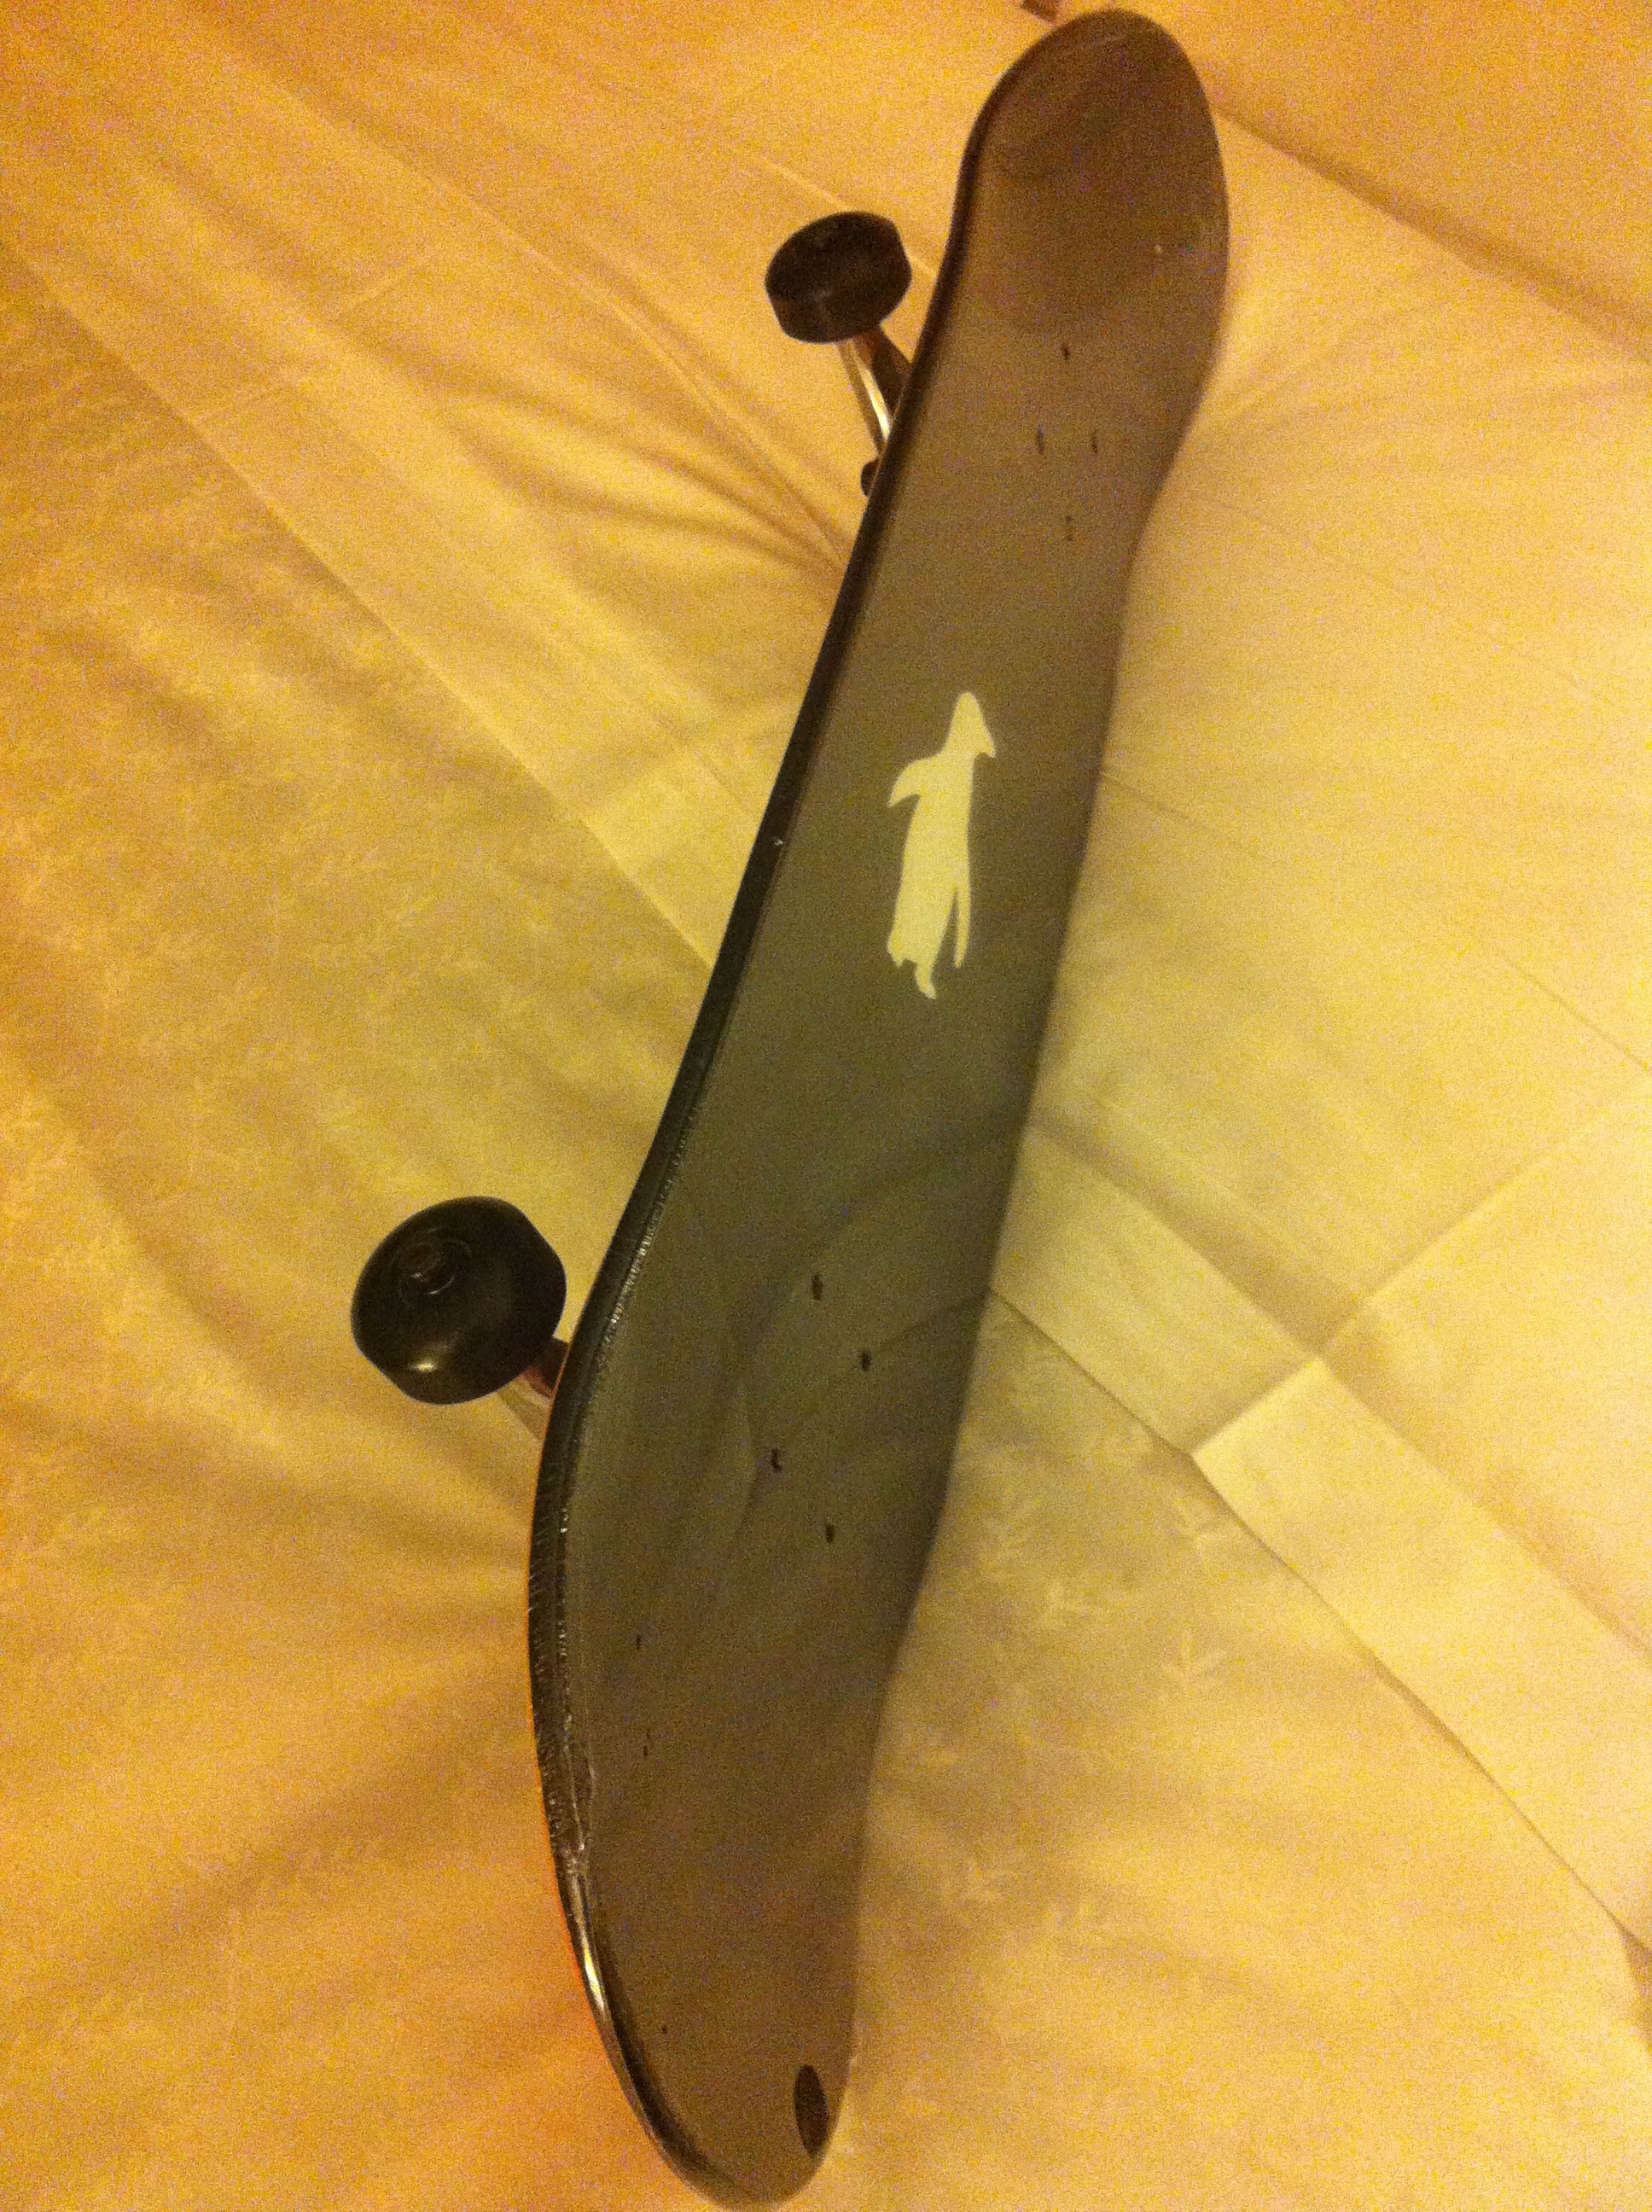 image from Included in the LinuxCon registration packet: a skateboard